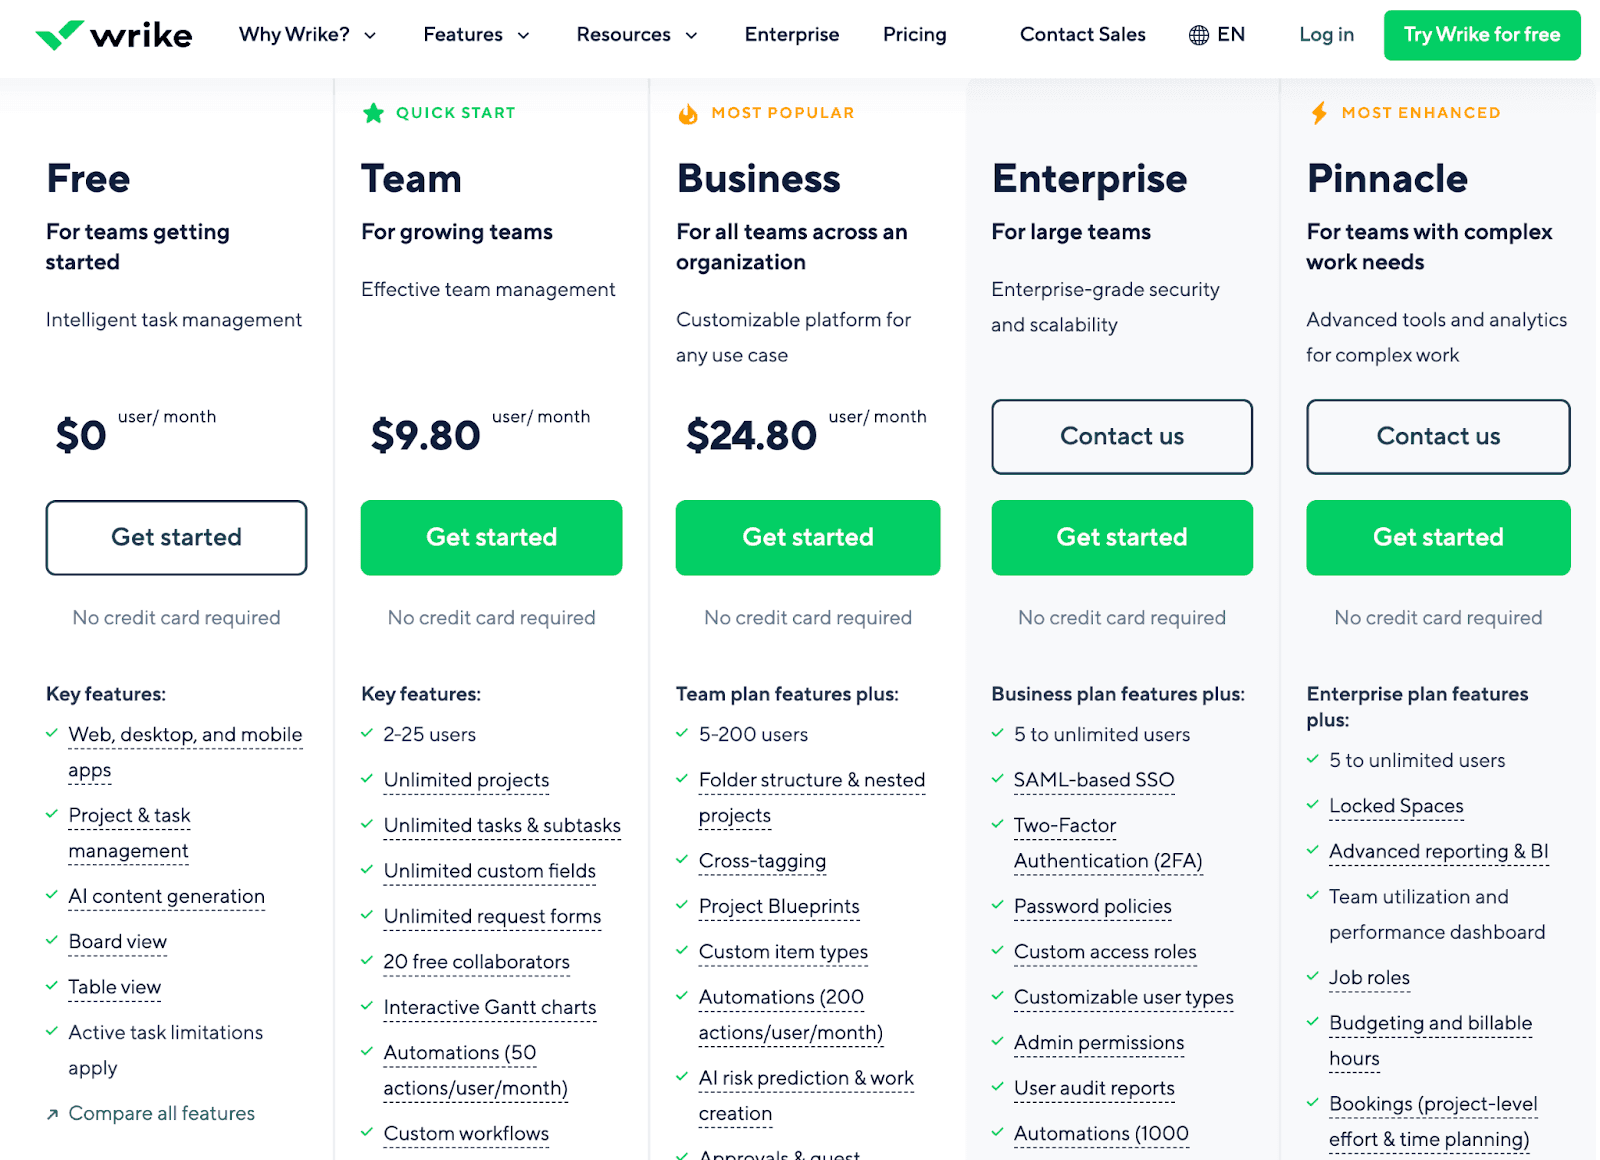 Wrike pricing - Free, team($9.80), business($24.80), enterprise, pinnacle (no prices listed)